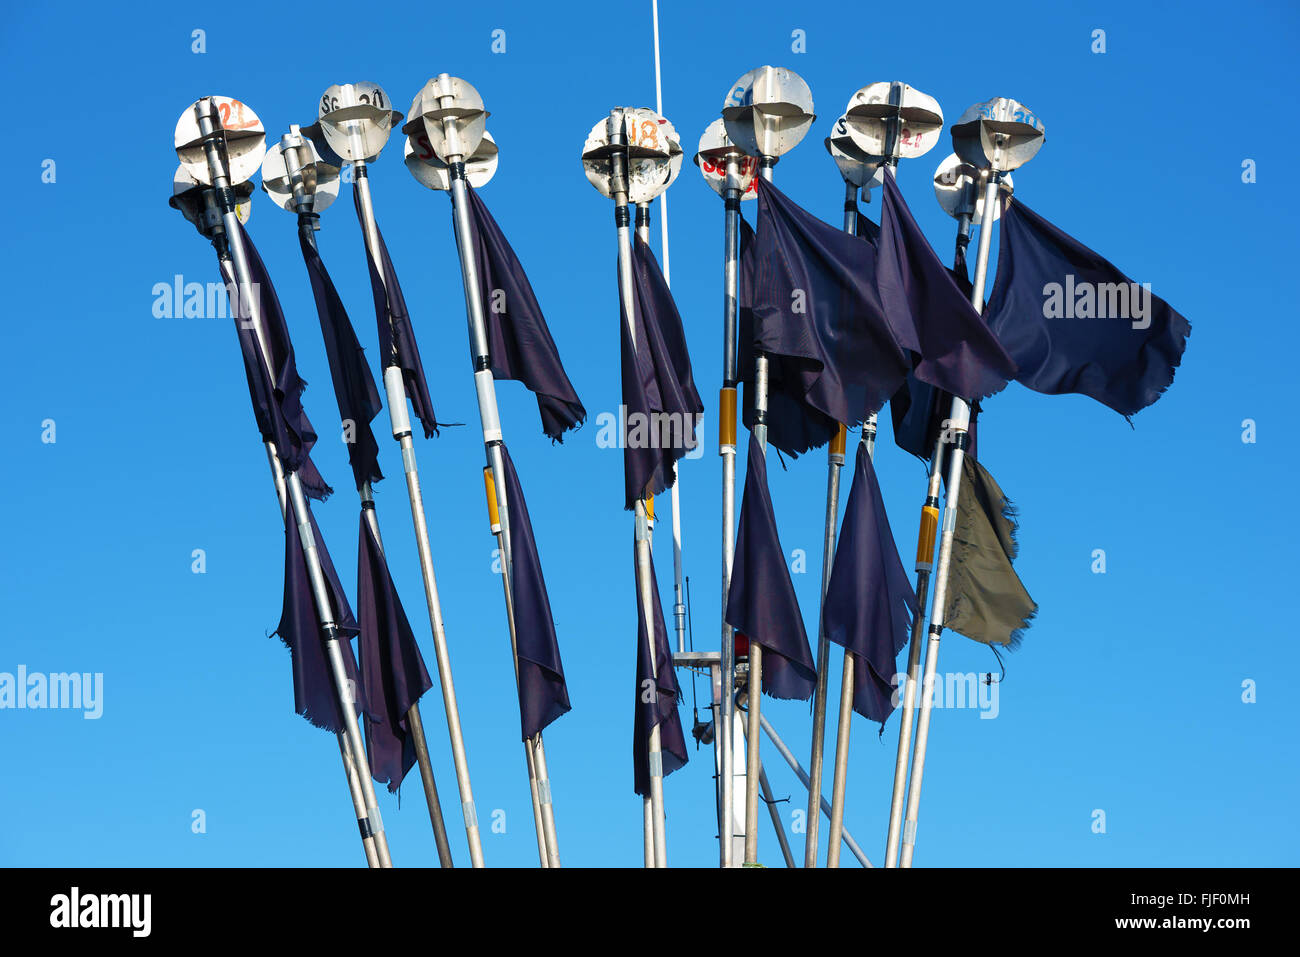 Nogersund, Sweden - February 27, 2016: A bunch of fisherman identity markers with black flags and metal radar reflectors on top. Stock Photo